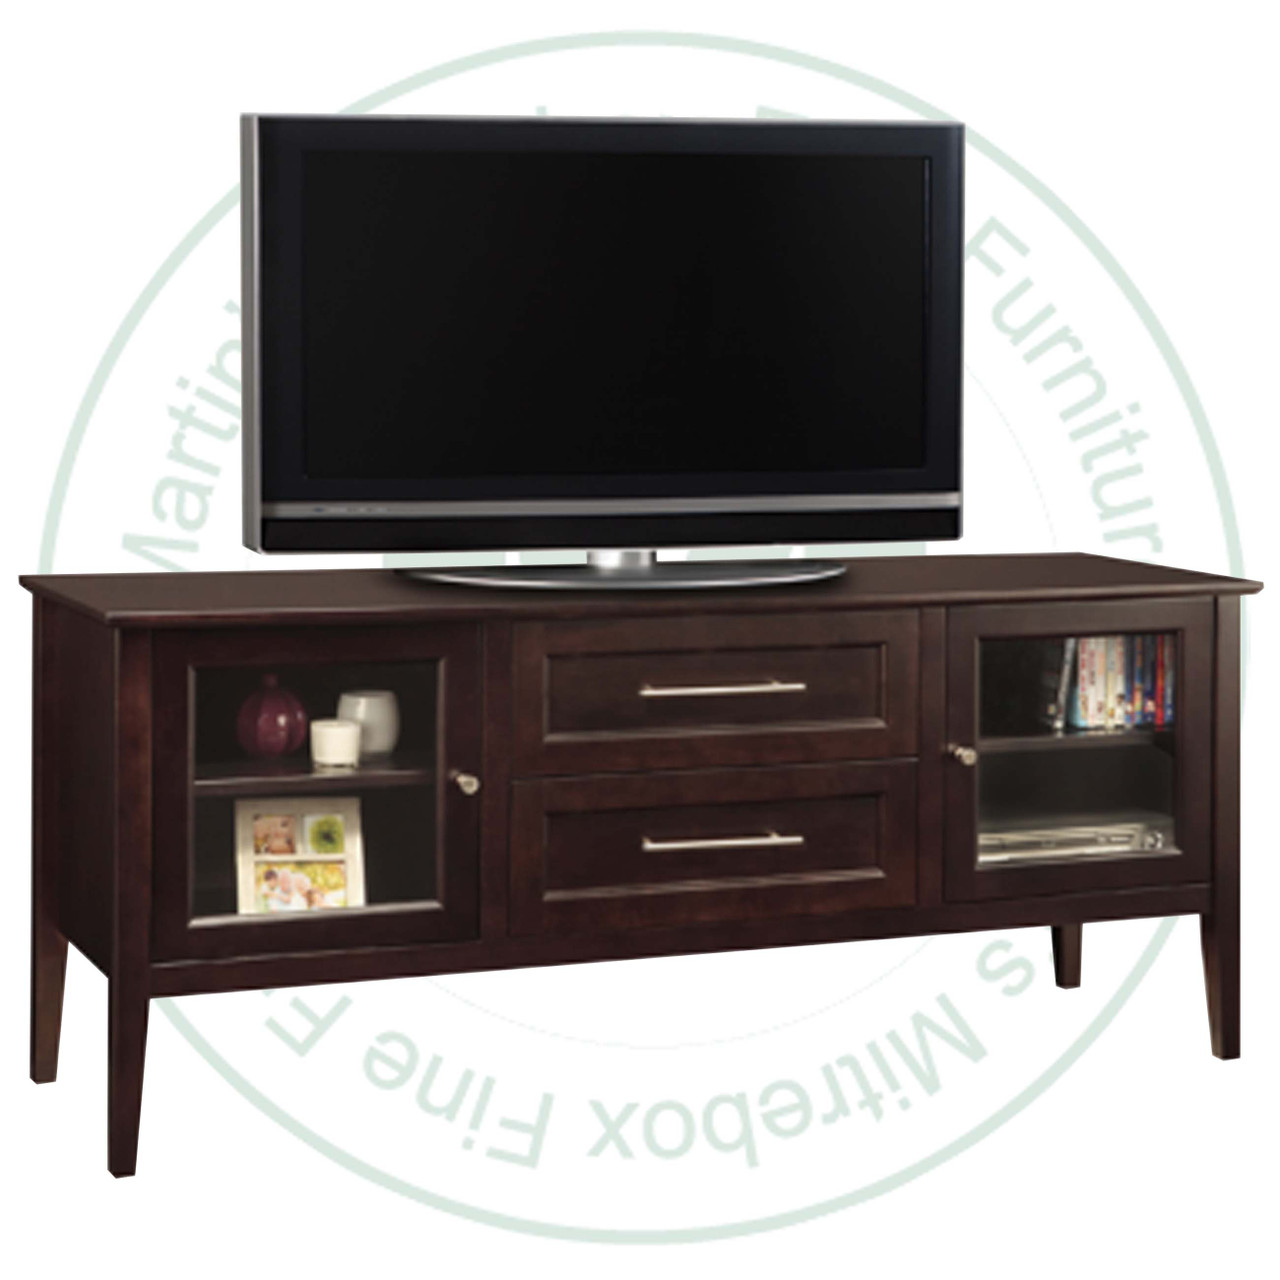 Wormy Maple Stockholm 74" HDTV Cabinet